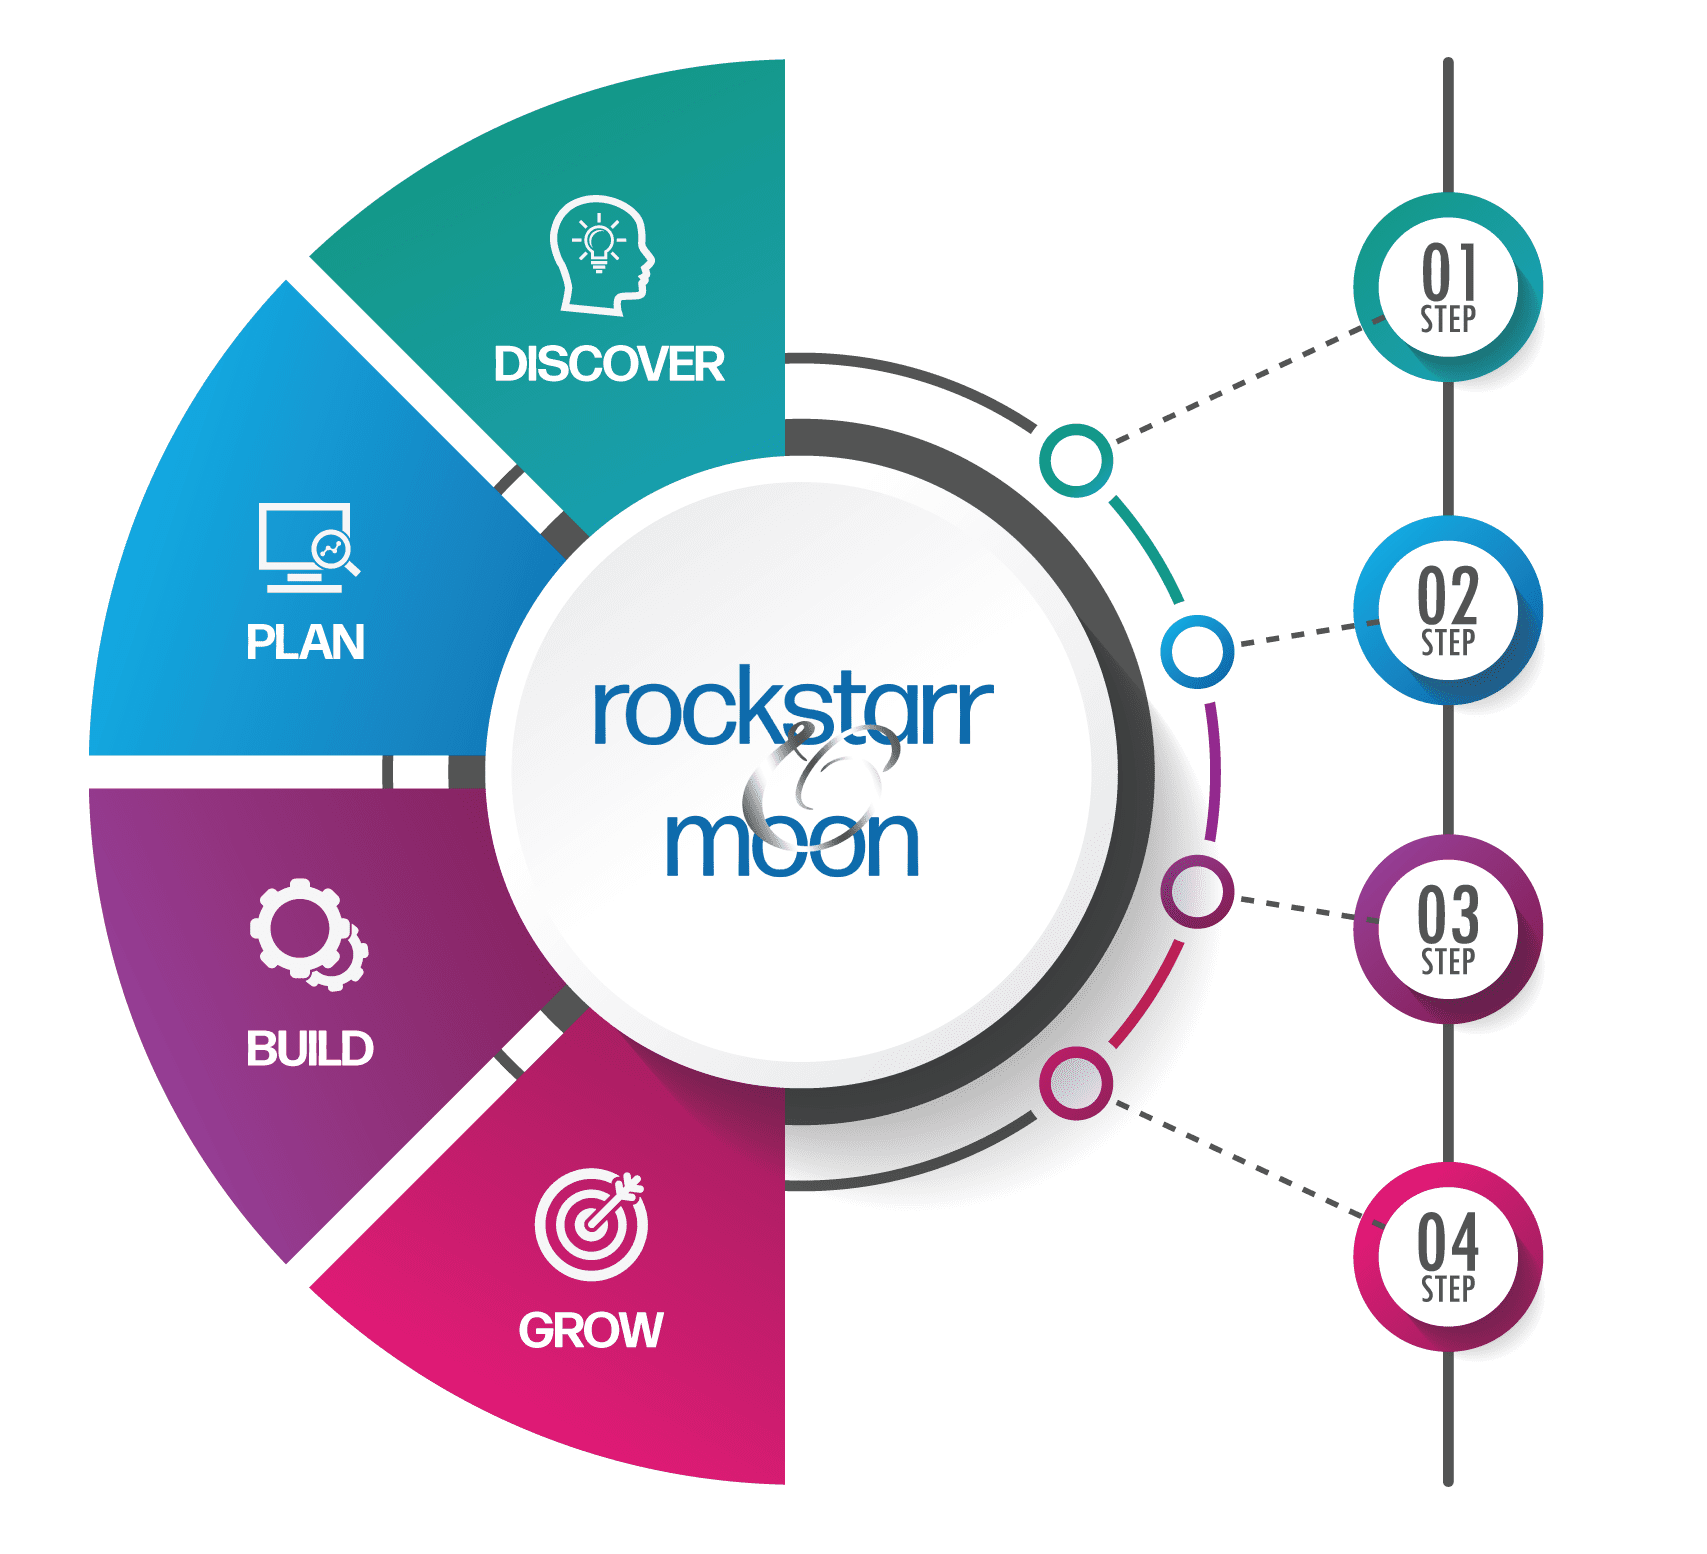 rockstarr and moon marketing services